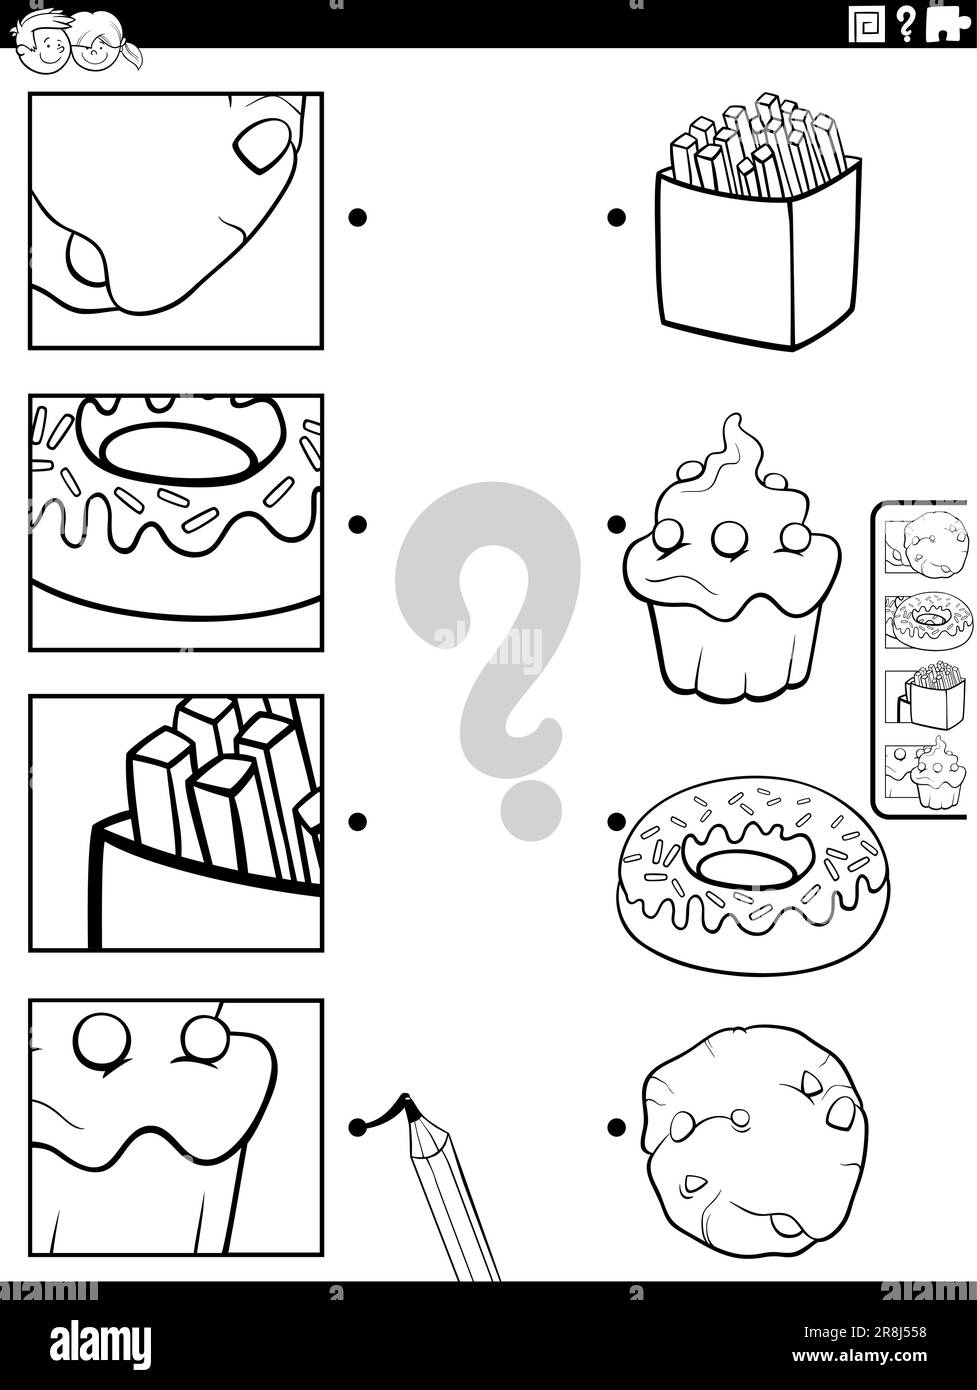 Black and white cartoon illustration of educational matching game with food objects and sweets and pictures clippings coloring page Stock Vector